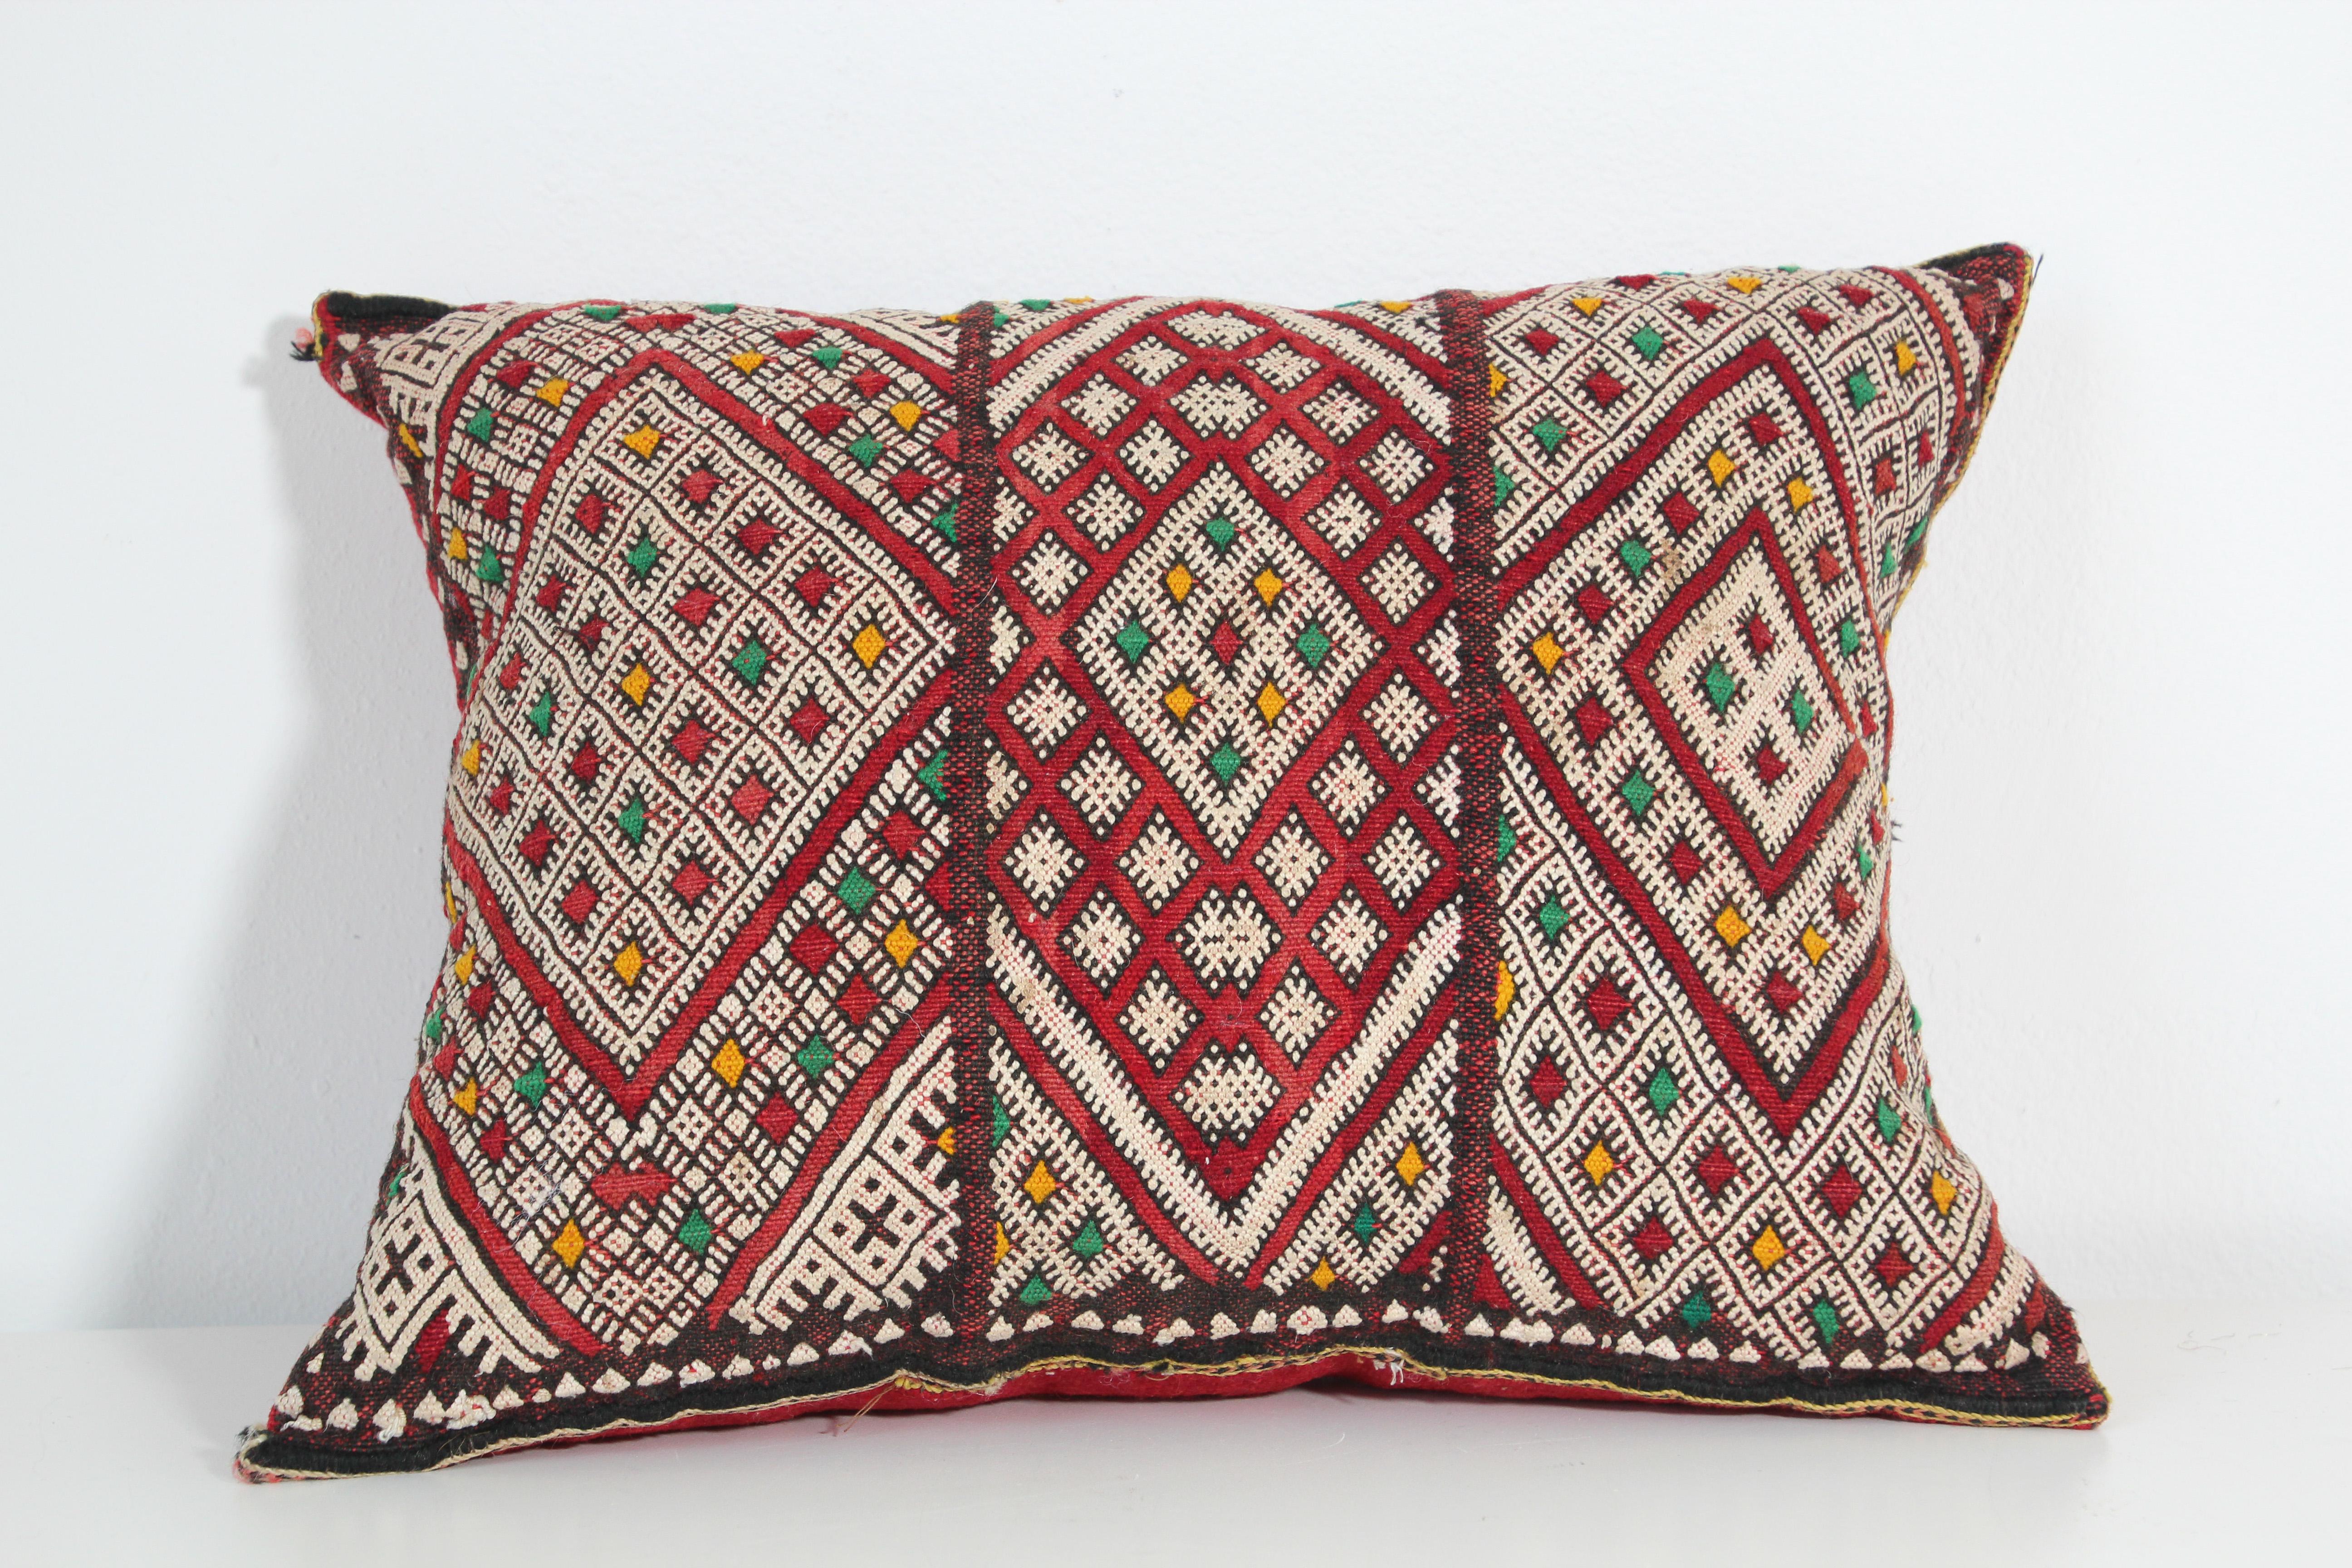 Moroccan African Berber Pillow with Tribal Designs 8